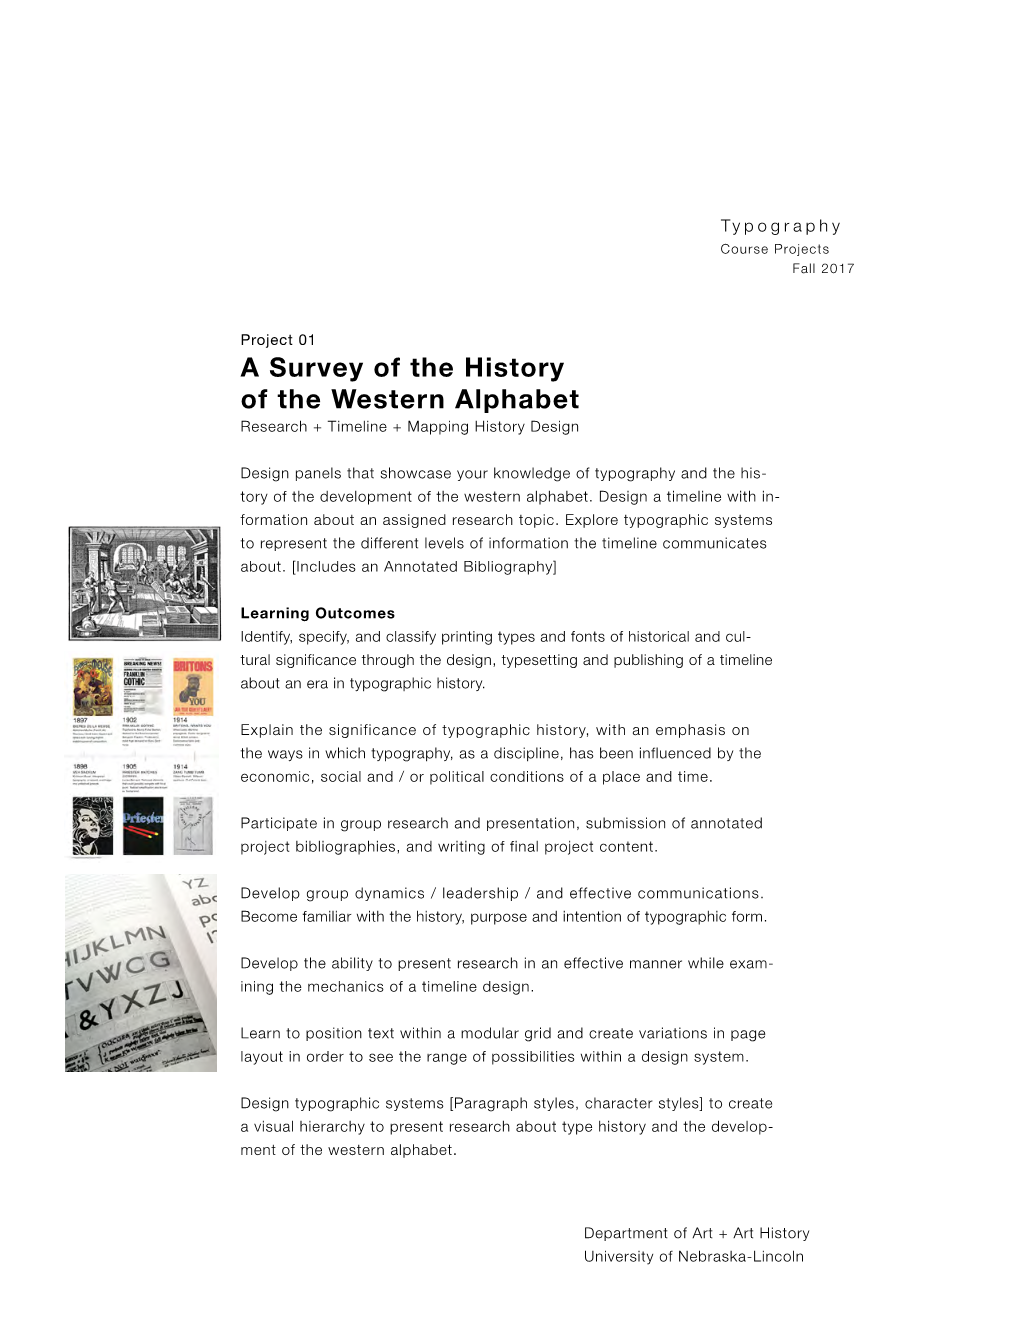 A Survey of the History of the Western Alphabet Research + Timeline + Mapping History Design